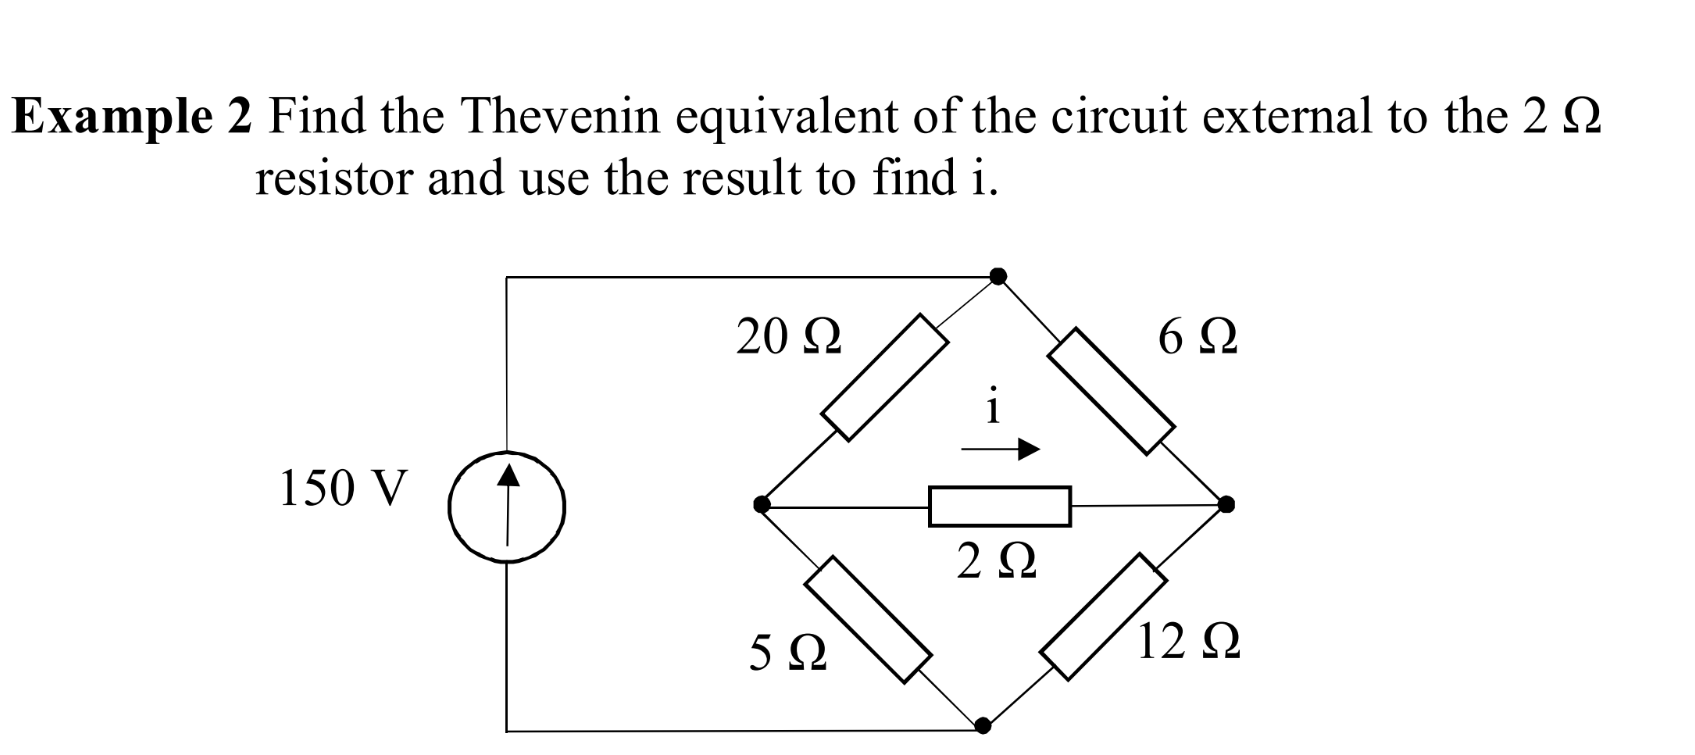 Example 2 Find the Thevenin equivalent of the circuit external to the 2 2
resistor and use the result to find i.
20 Ω
6 Ω
150 V
2Ω
12 2
